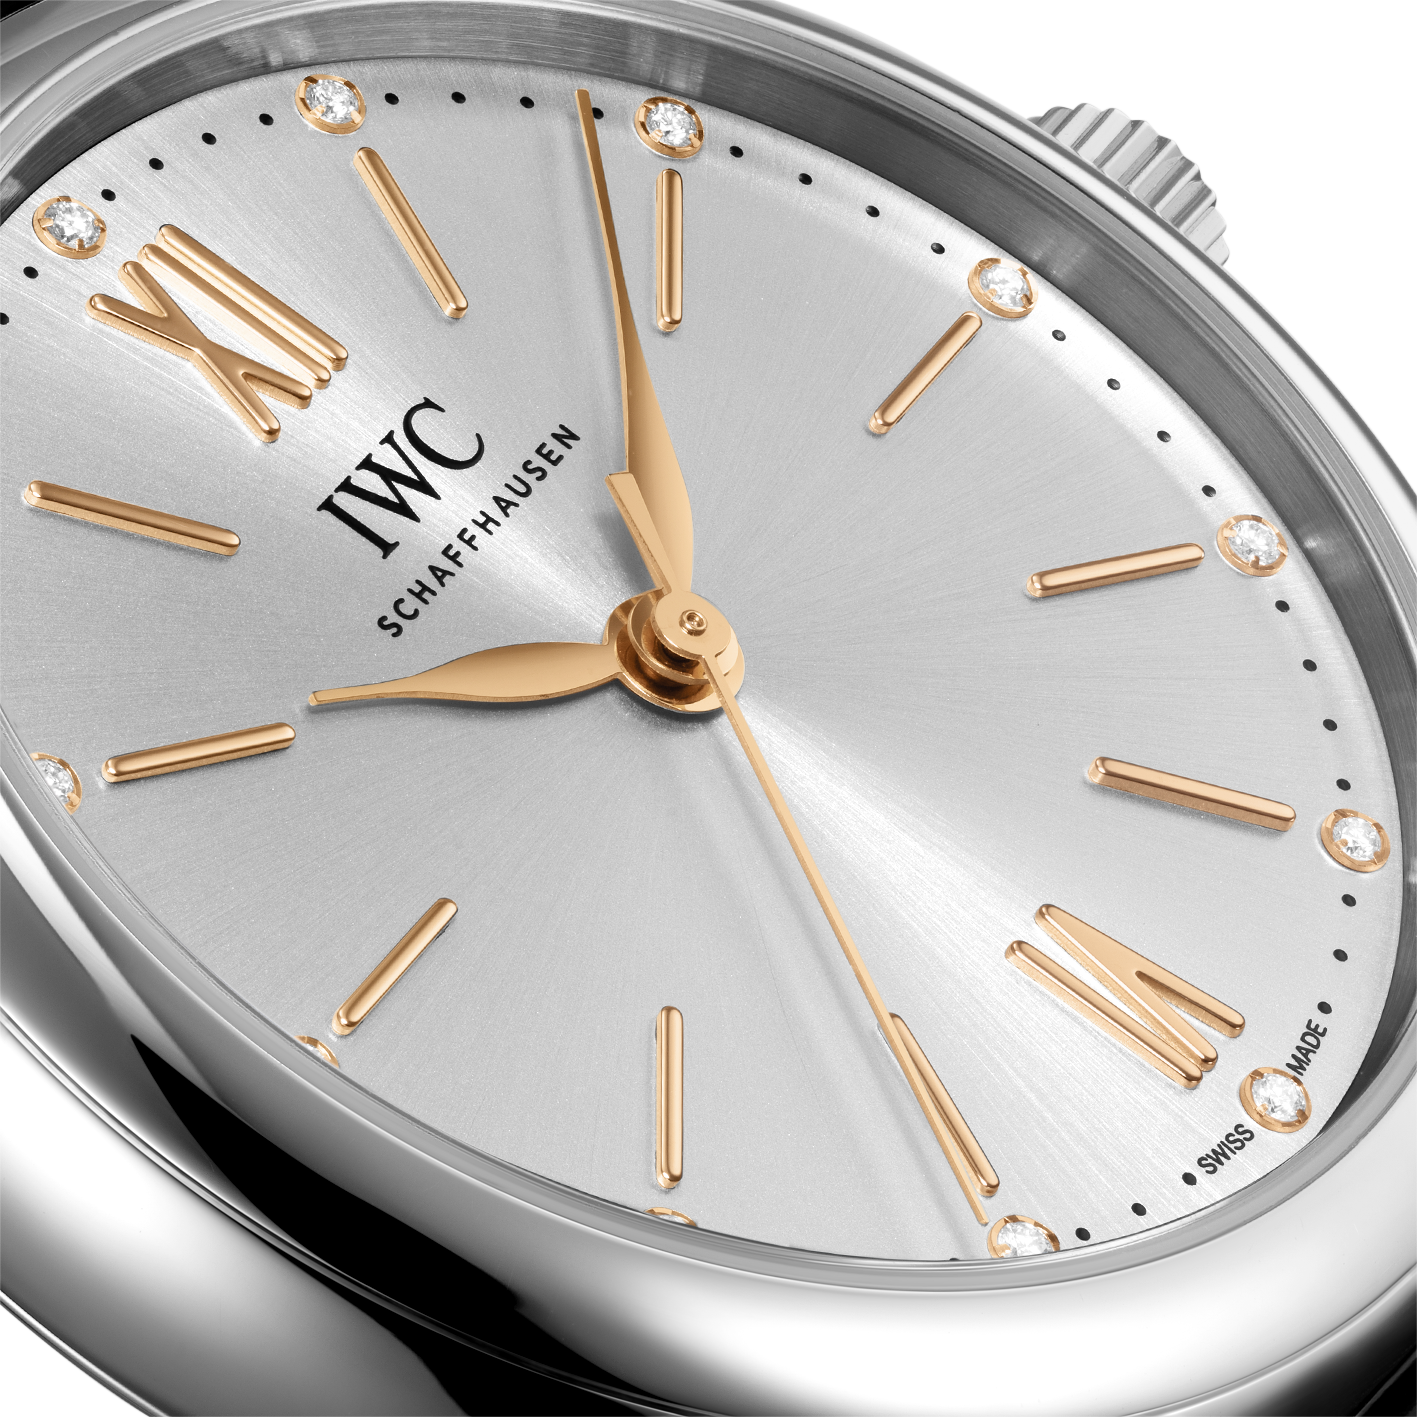 IWC Portofino Automatic Silver Dial Brown Leather Strap Watch for Women - IW357403